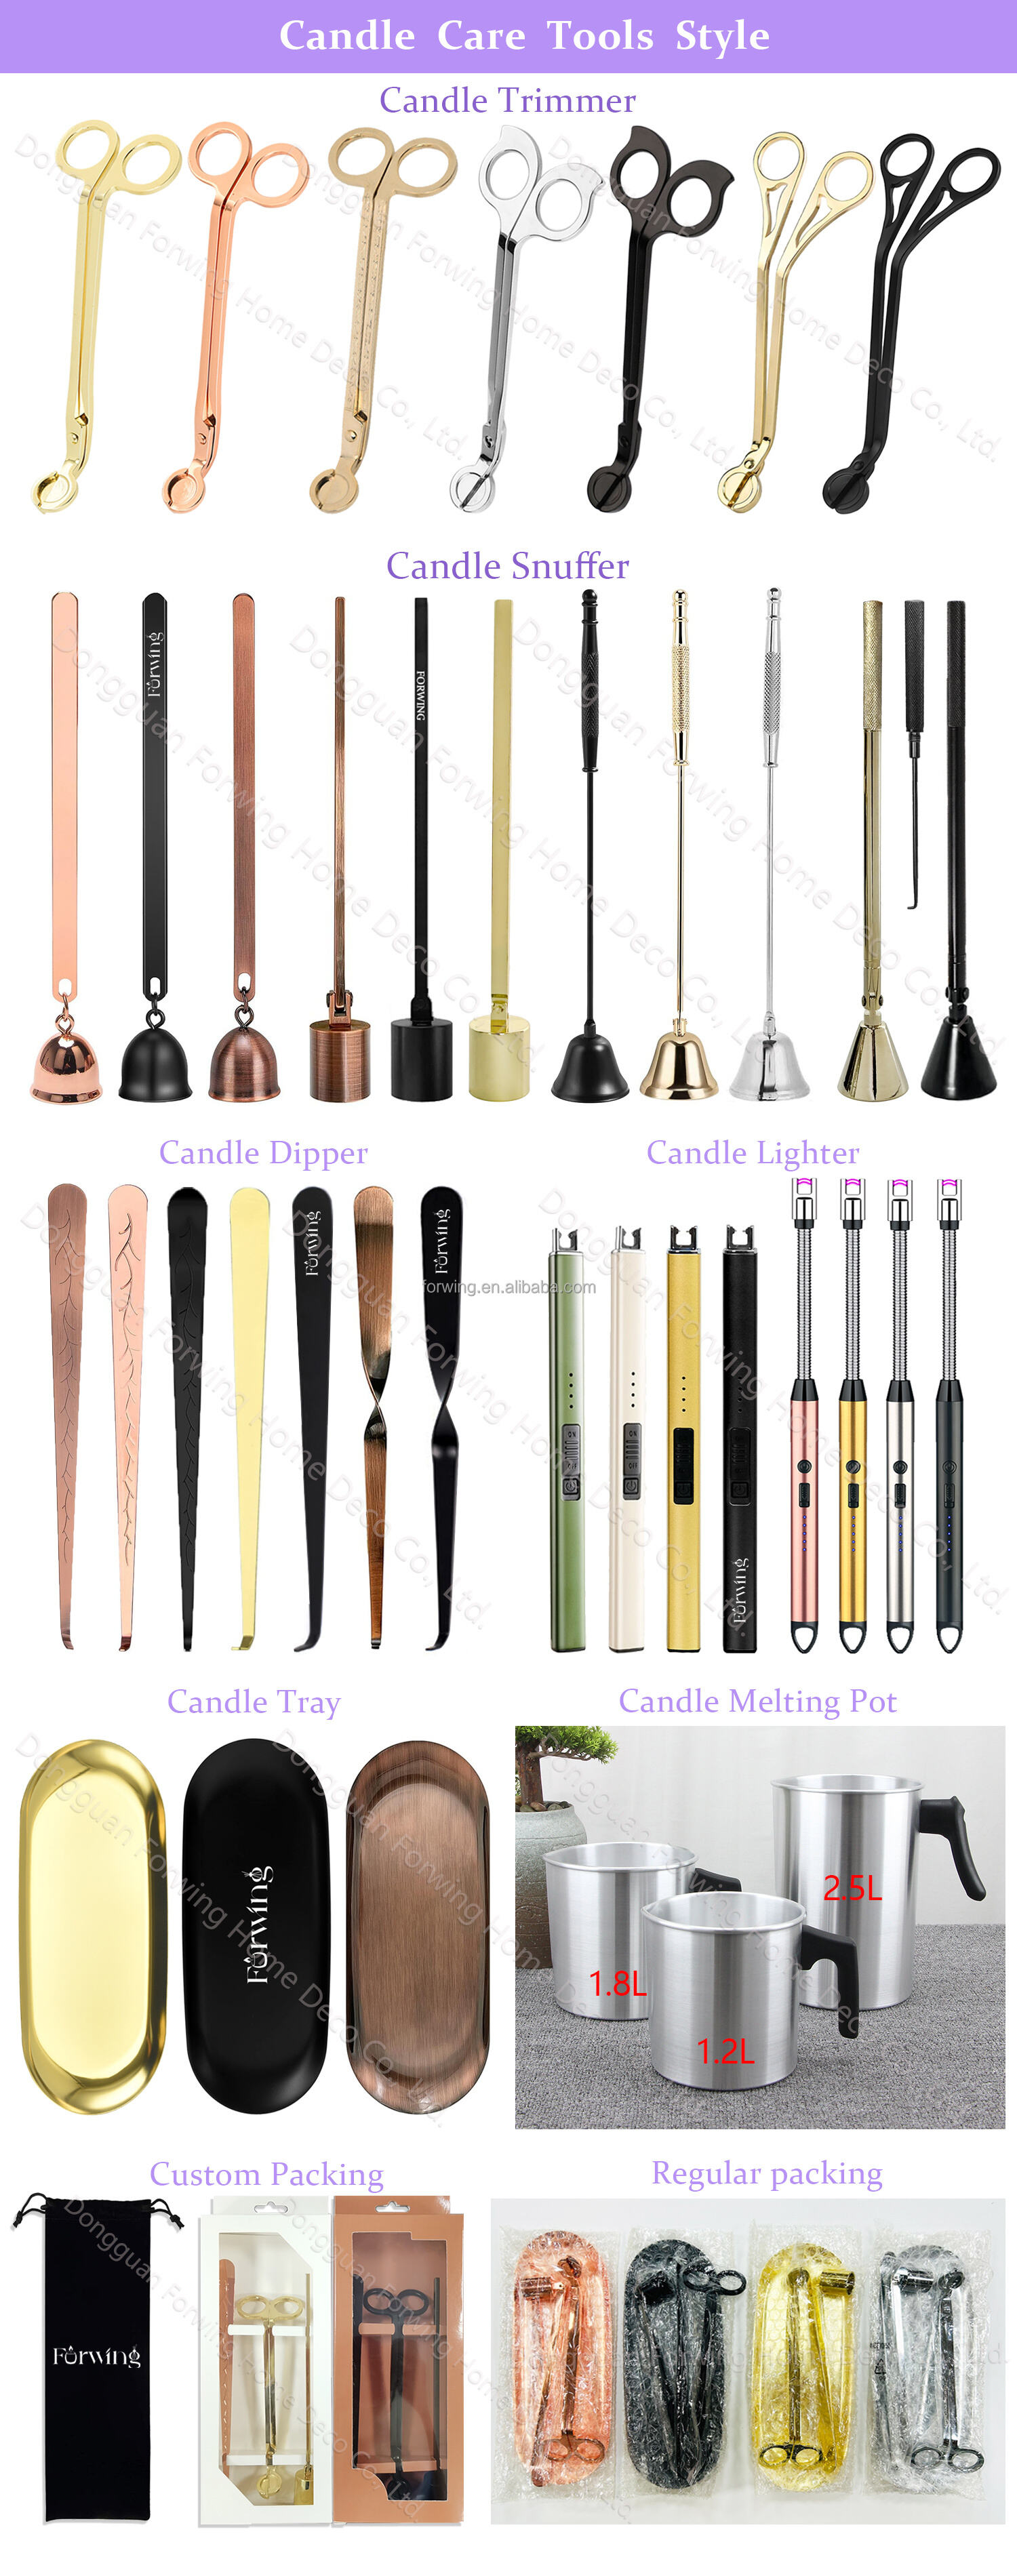 Candle Lighter Electric Arc Lighter Rechargeable USB Lighter Flameless Grill Lighter Long for Candle BBQ manufacture